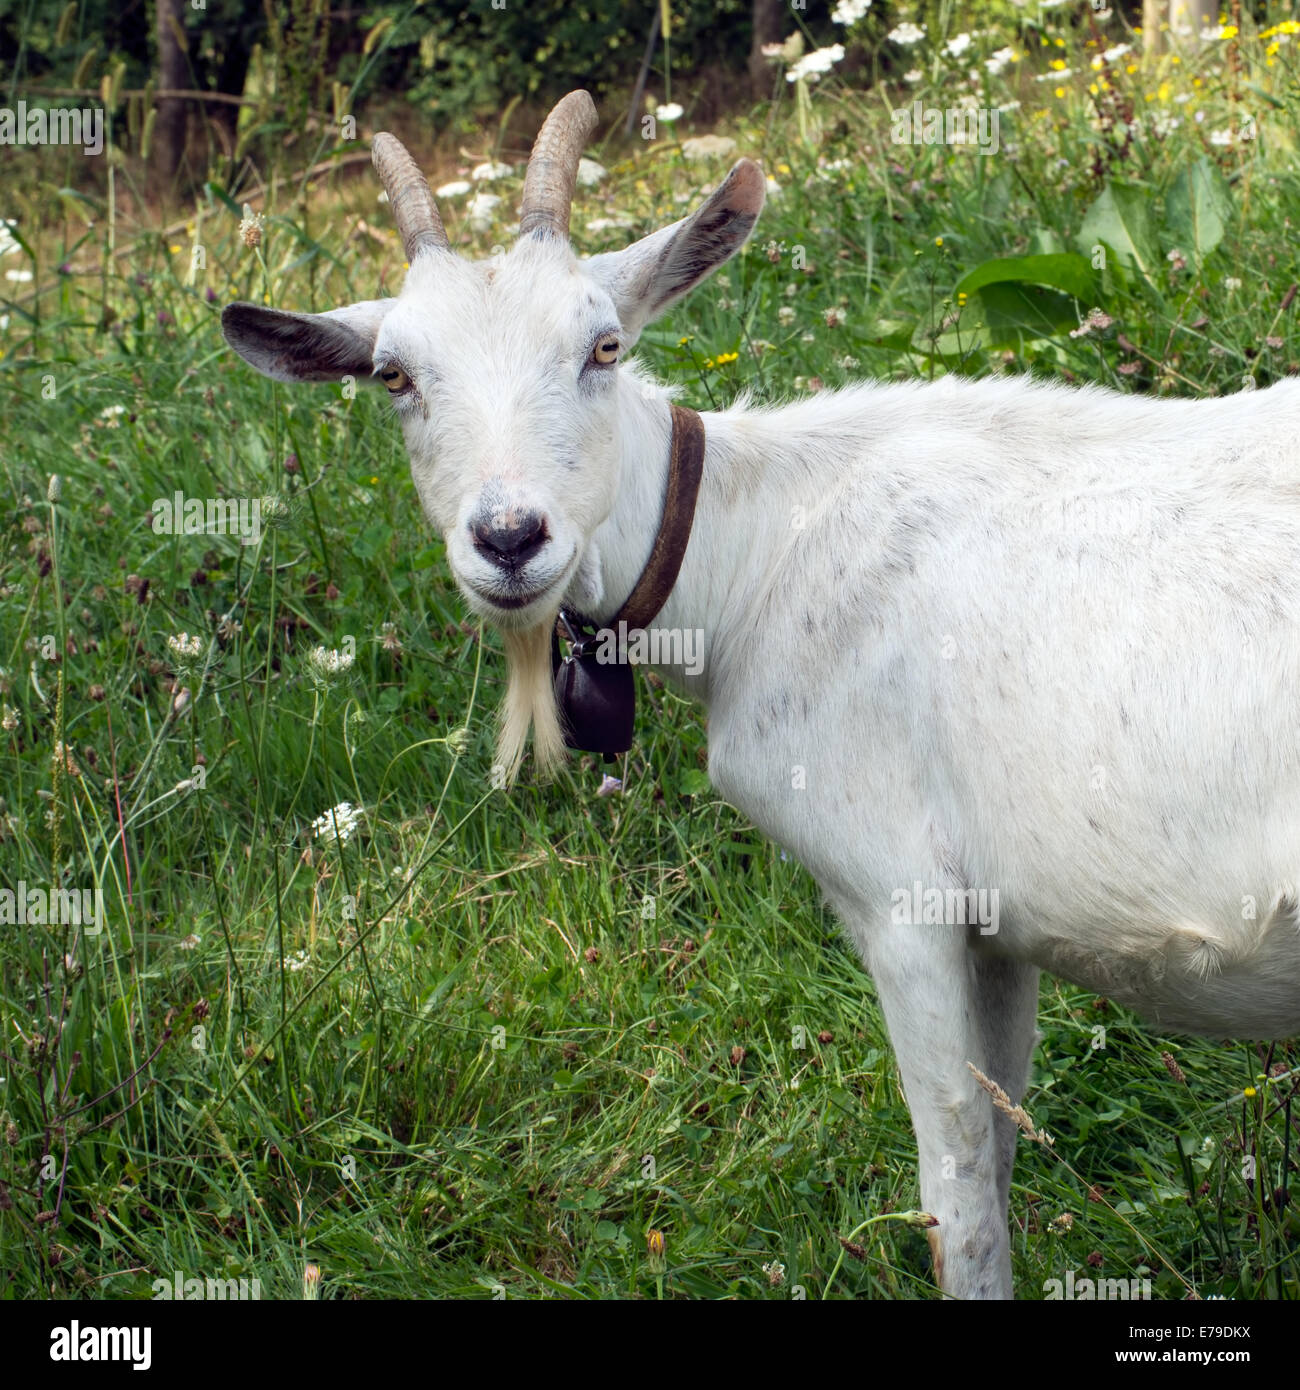 Curious white billygoat. Stock Photo